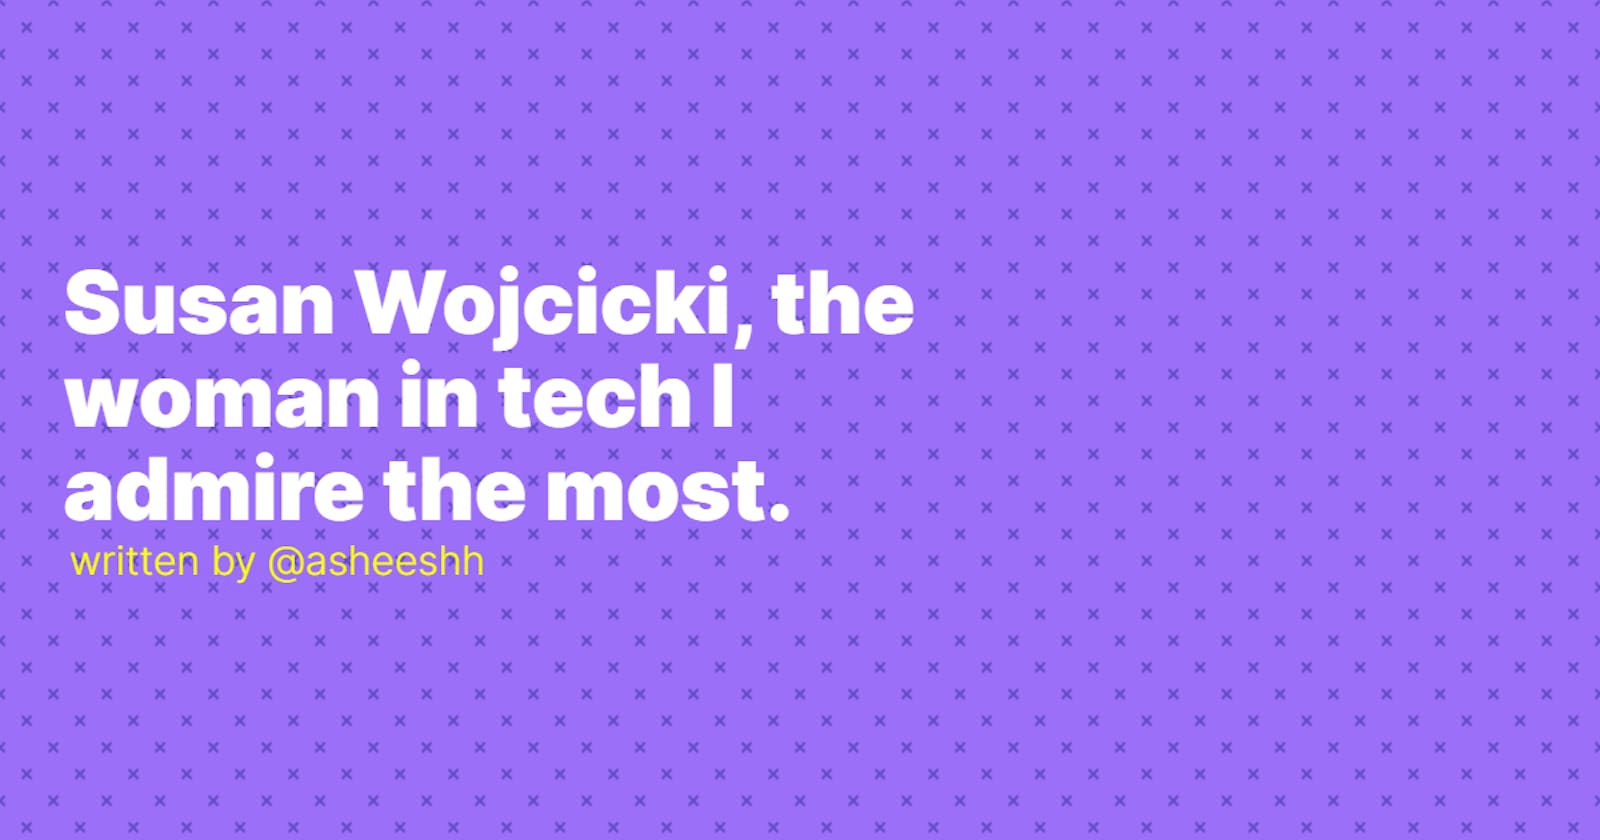 Susan Wojcicki, the woman in tech I admire the most.